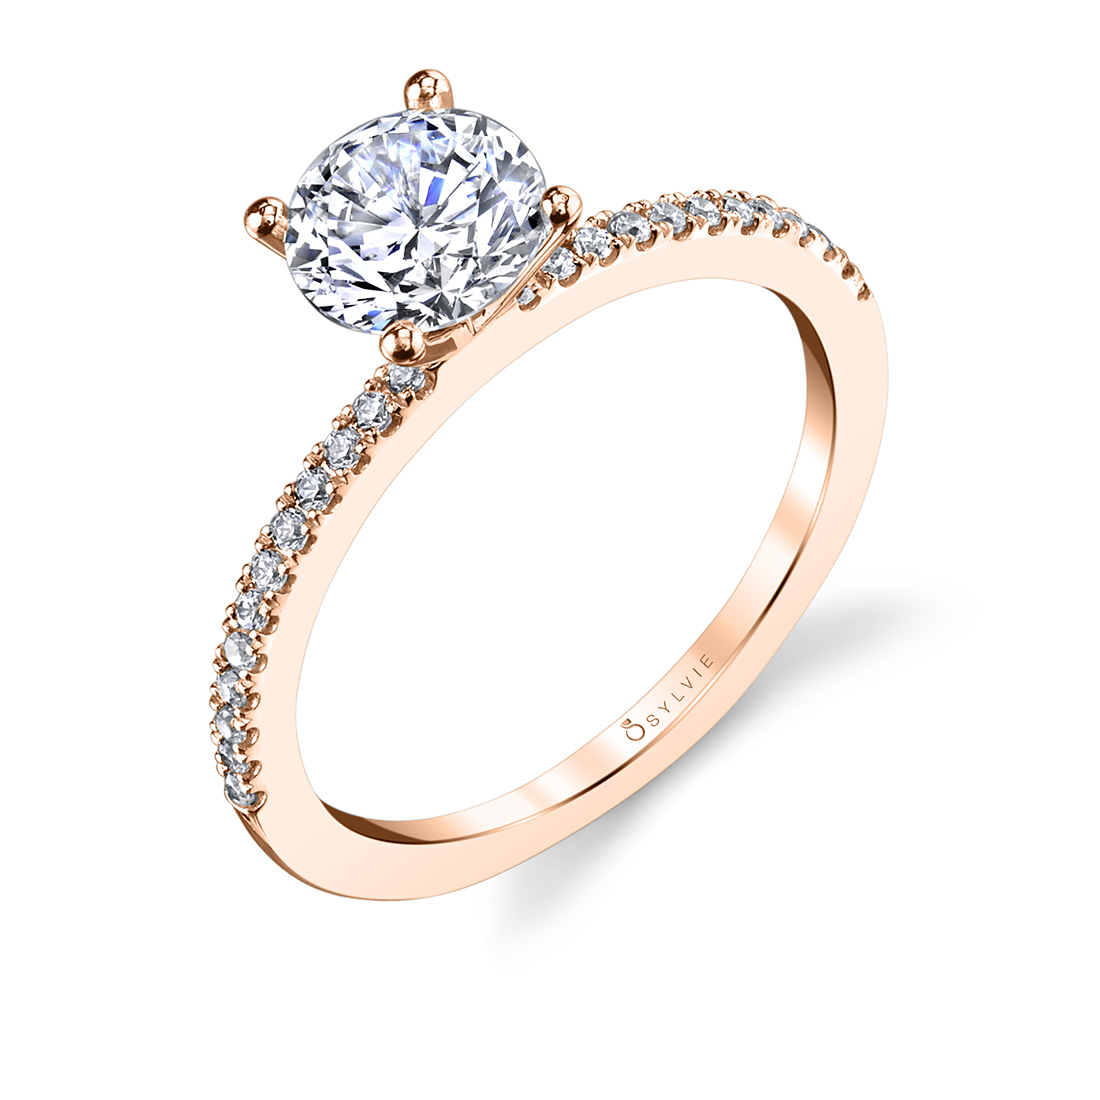 Pave Engagement Ring in Rose Gold - Carlotta